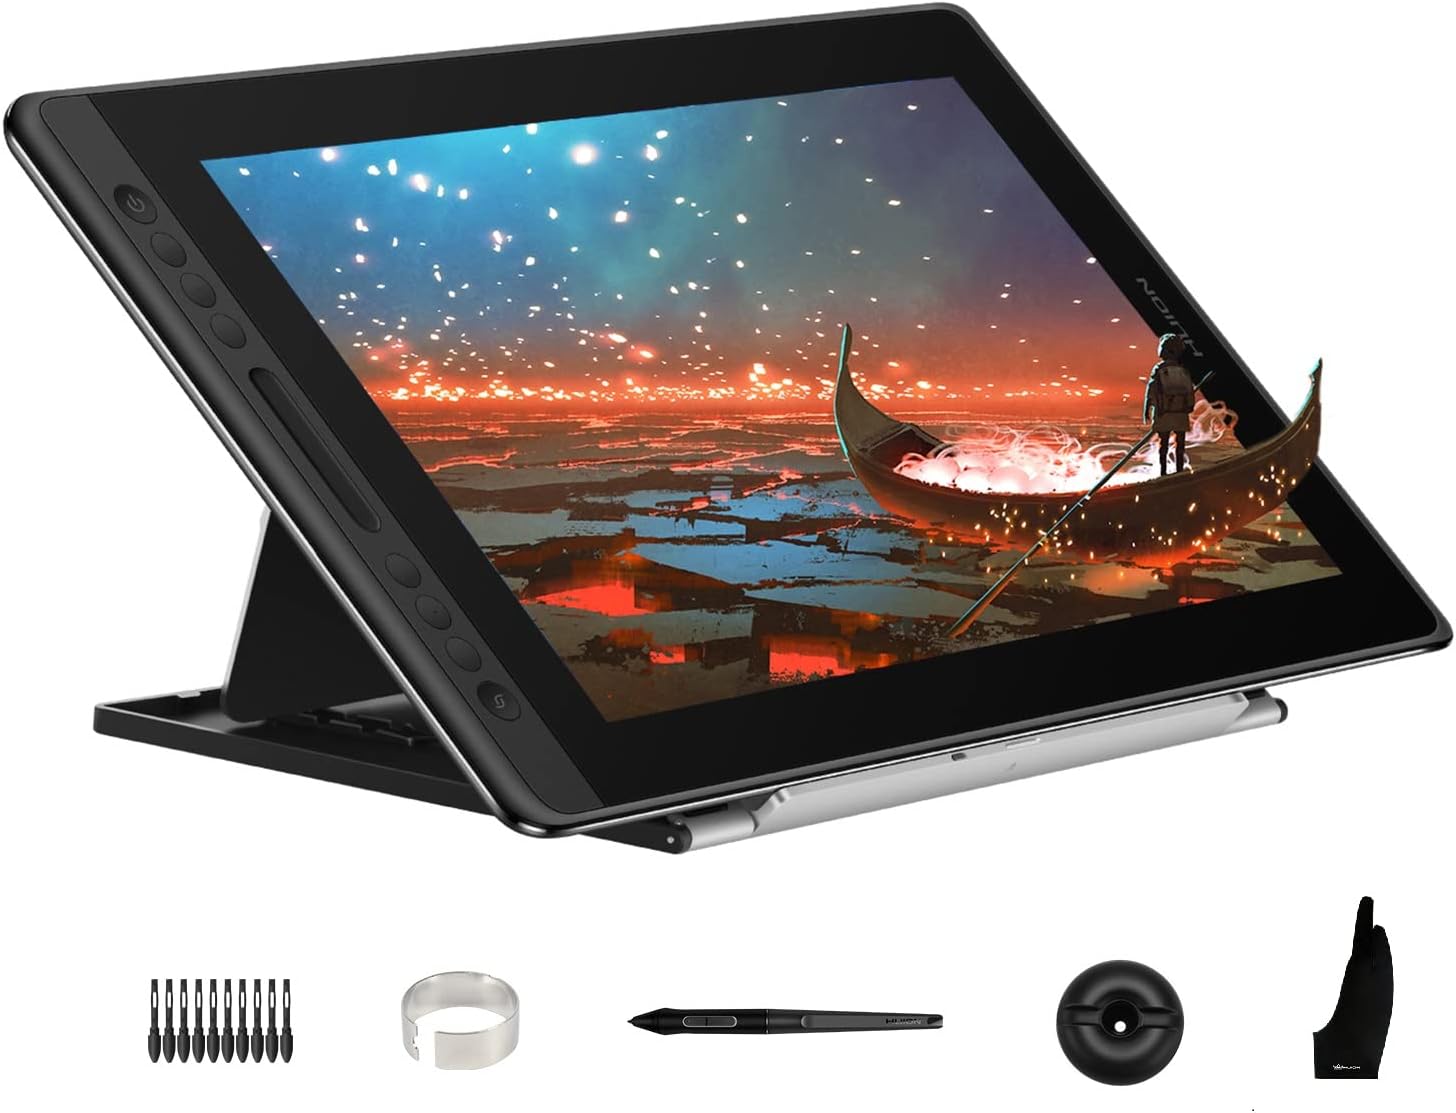 HUION KAMVAS Pro 16 Drawing Tablet with Screen, 15.6 inch Pen Display Anti-Glare Glass 6 Shortcut Keys Adjustable Stand, Graphics Tablet for Drawing, Writing, Design, Work with Windows, Mac and Linux 1